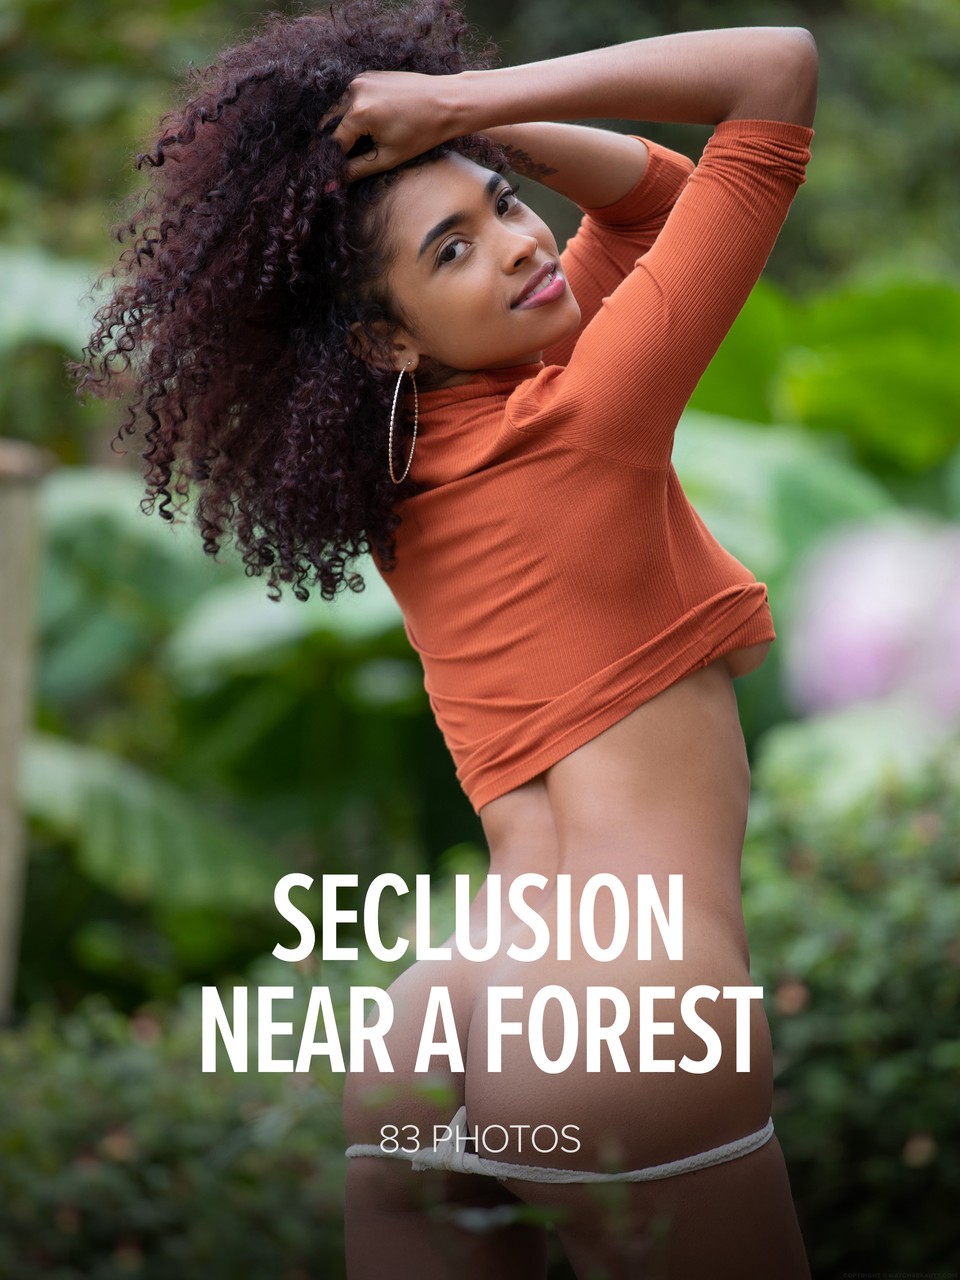 Watch 4 Beauty Barbie Seclusion Near A Forest